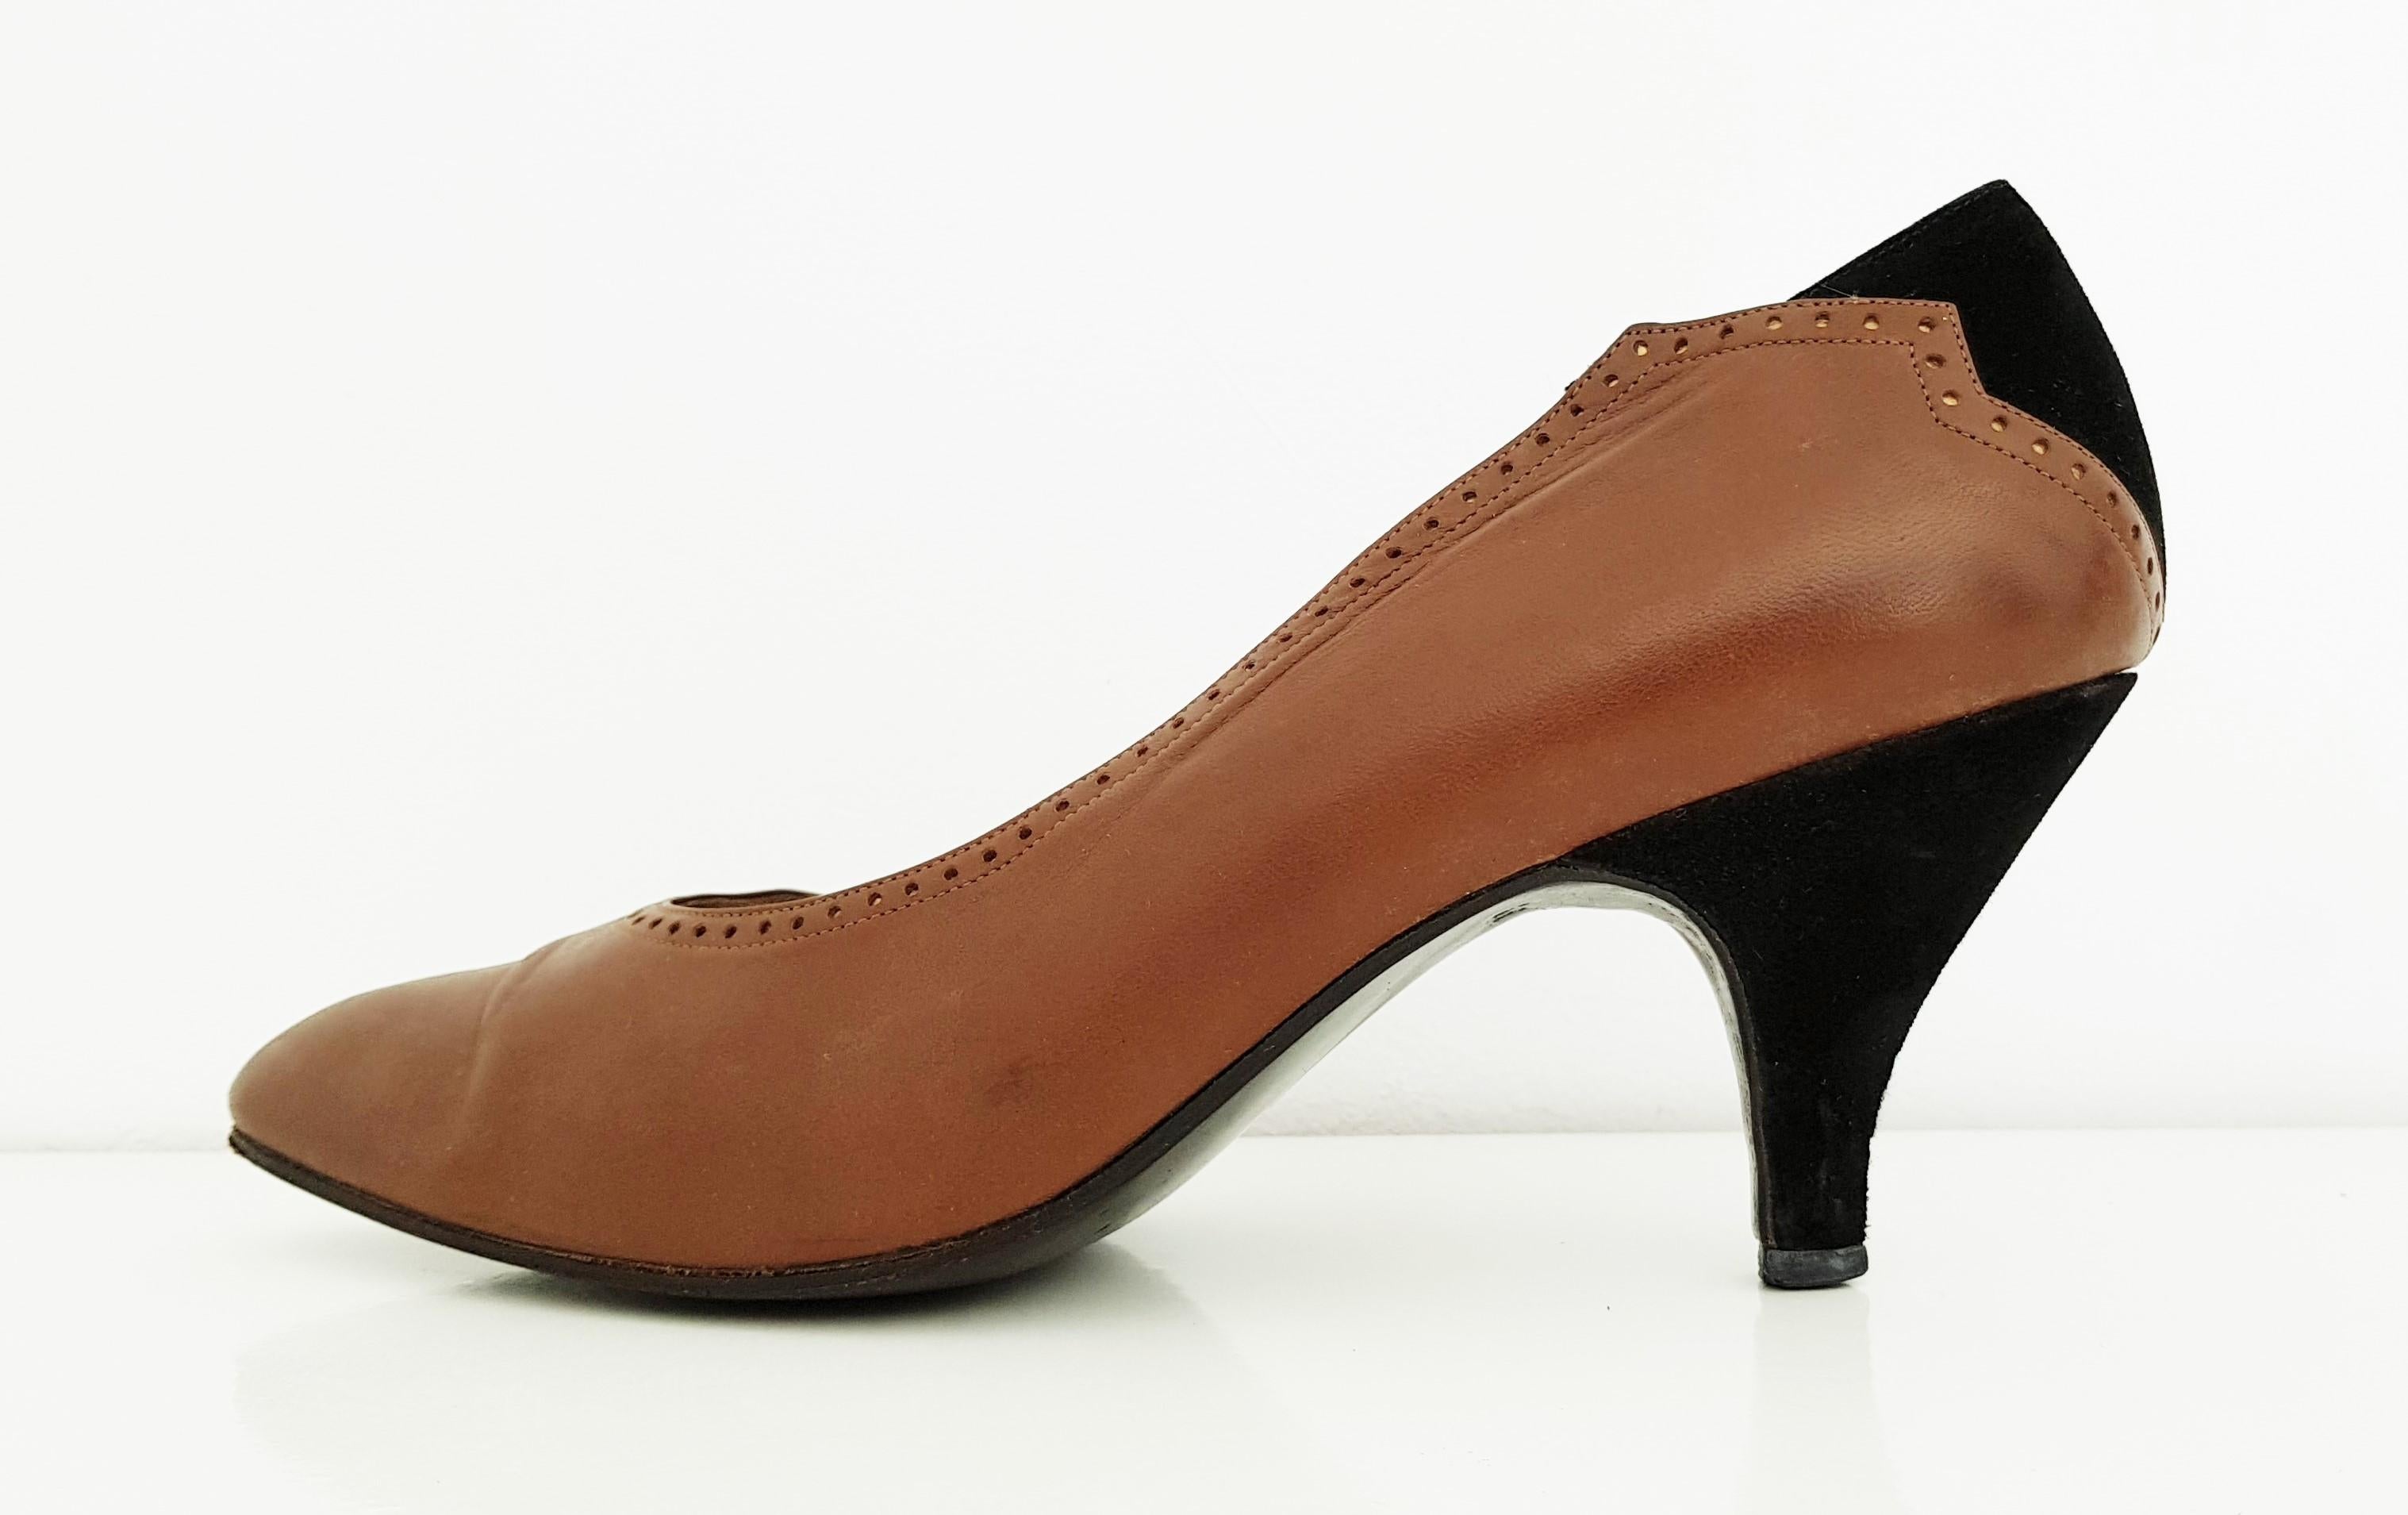 Maud Frizon Heels
Size 39 1/2 (59)
Brown Leather with Black Velvet patterns.
Embroidered with small holes with gold behind.
Length: 25 cm
Width: 8 cm 
Heel height: 7 cm
Made in Italy